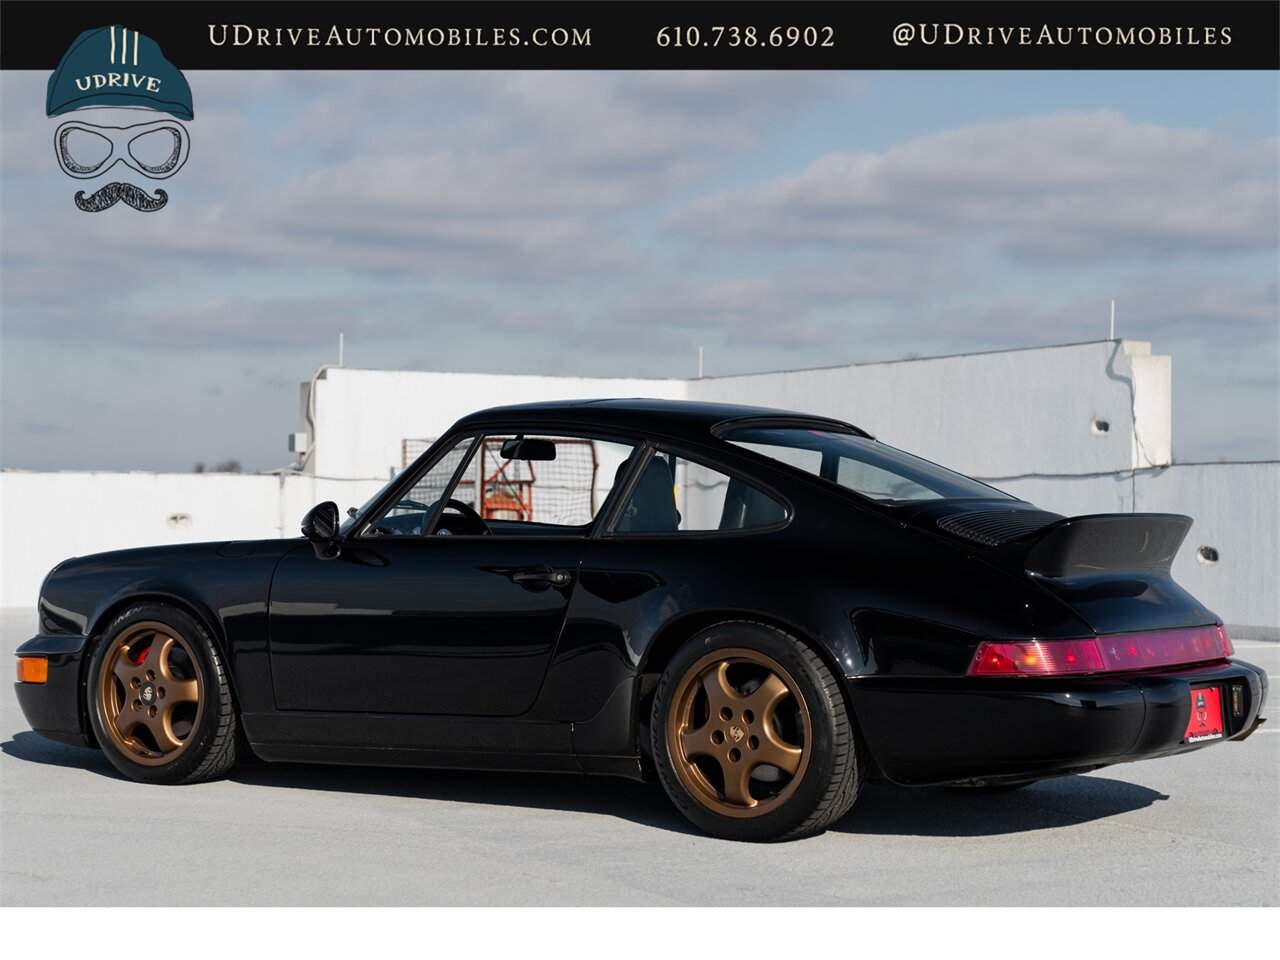 1989 Porsche 911 C4  964 Carrera 4 C4 5 Speed Manual $33k in Recent Service History - Photo 24 - West Chester, PA 19382